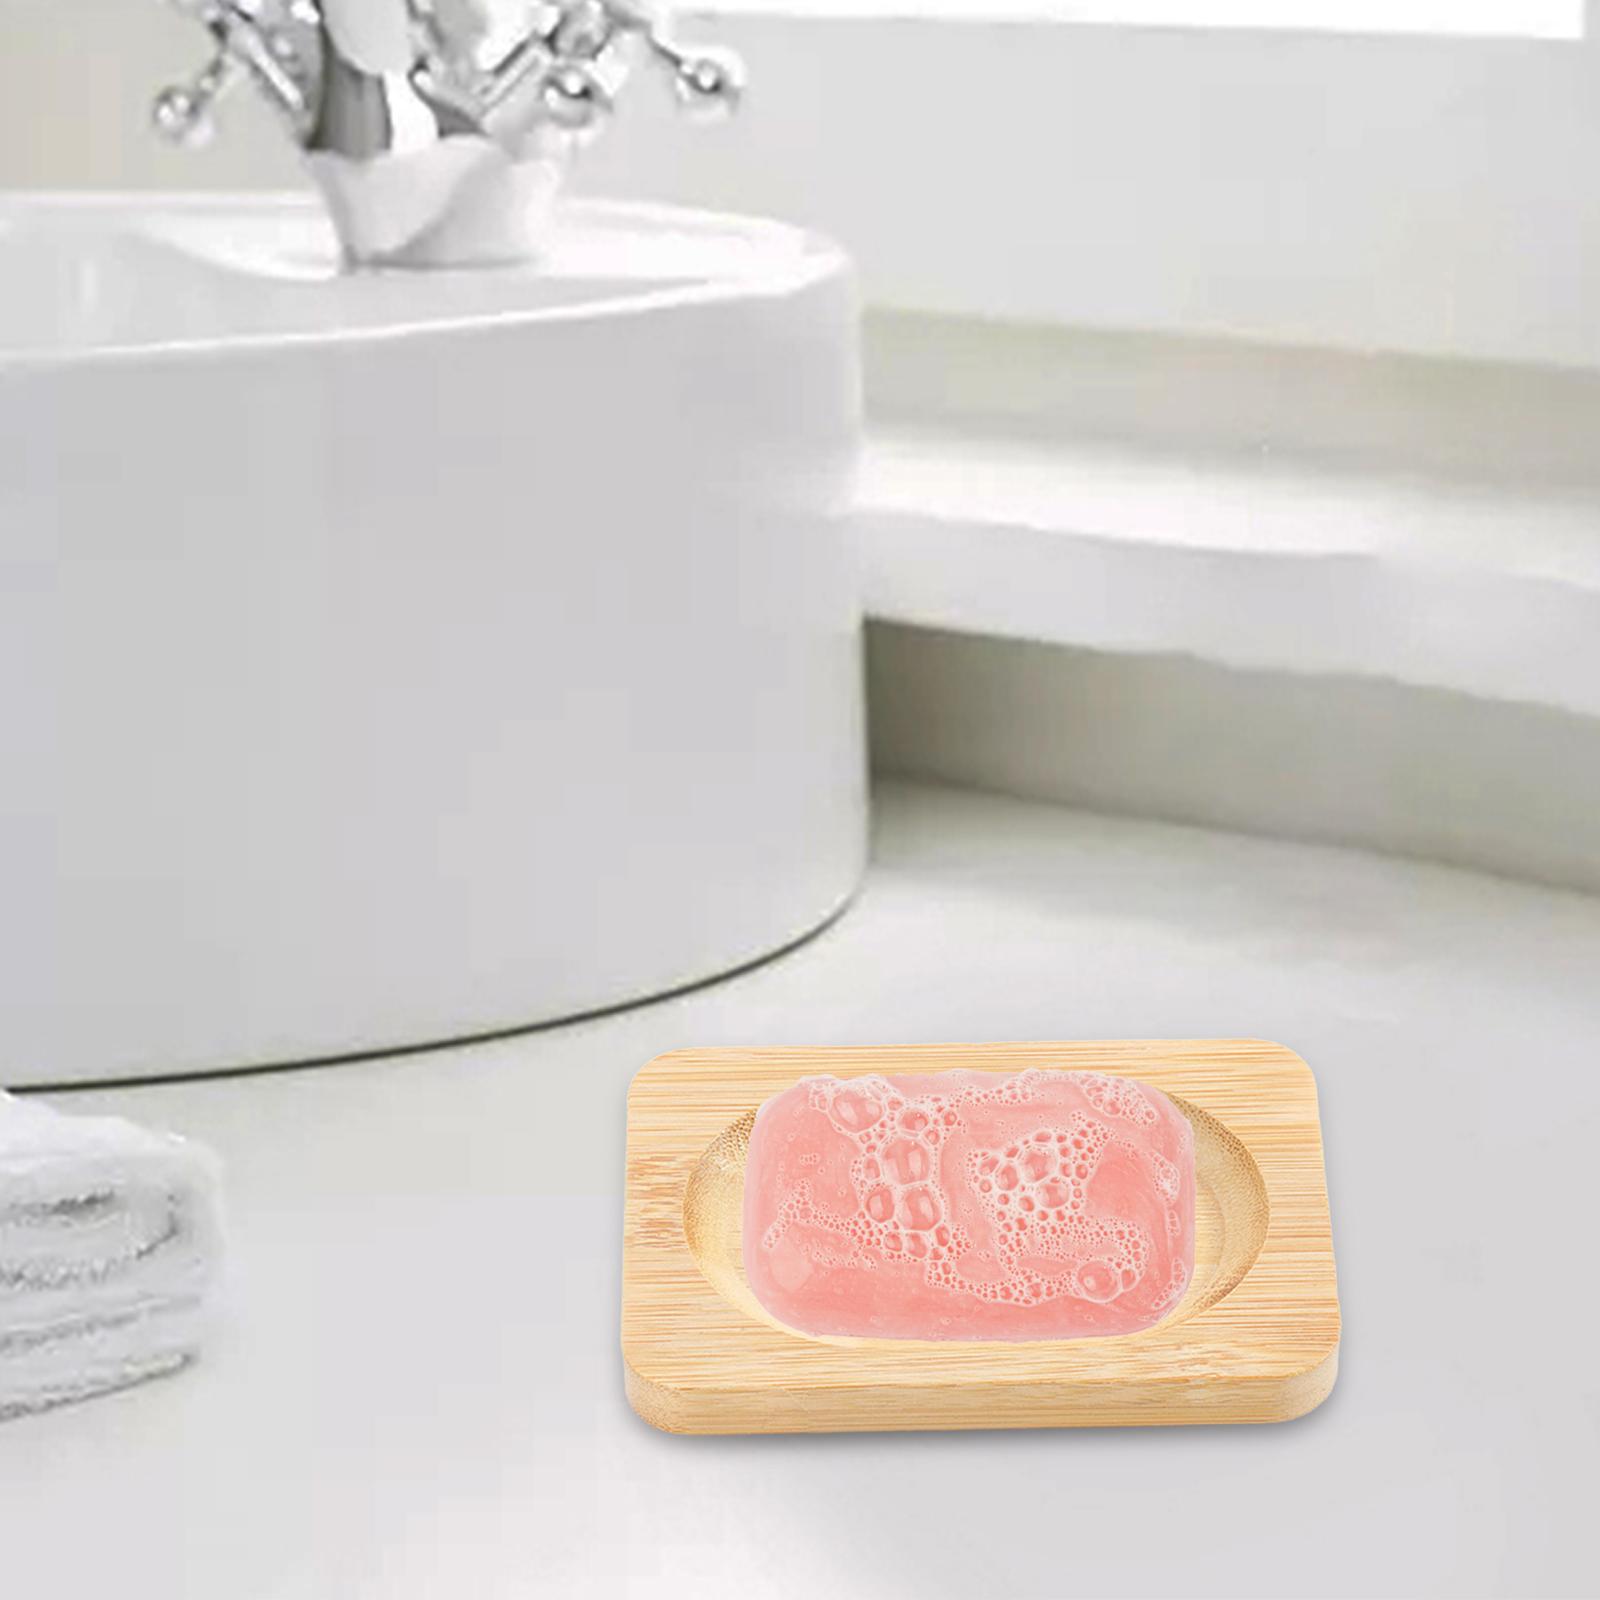 Wooden Soap Dish Home Decor Self Draining Soap Dish for Shower Sink Bathroom Light Wood Color